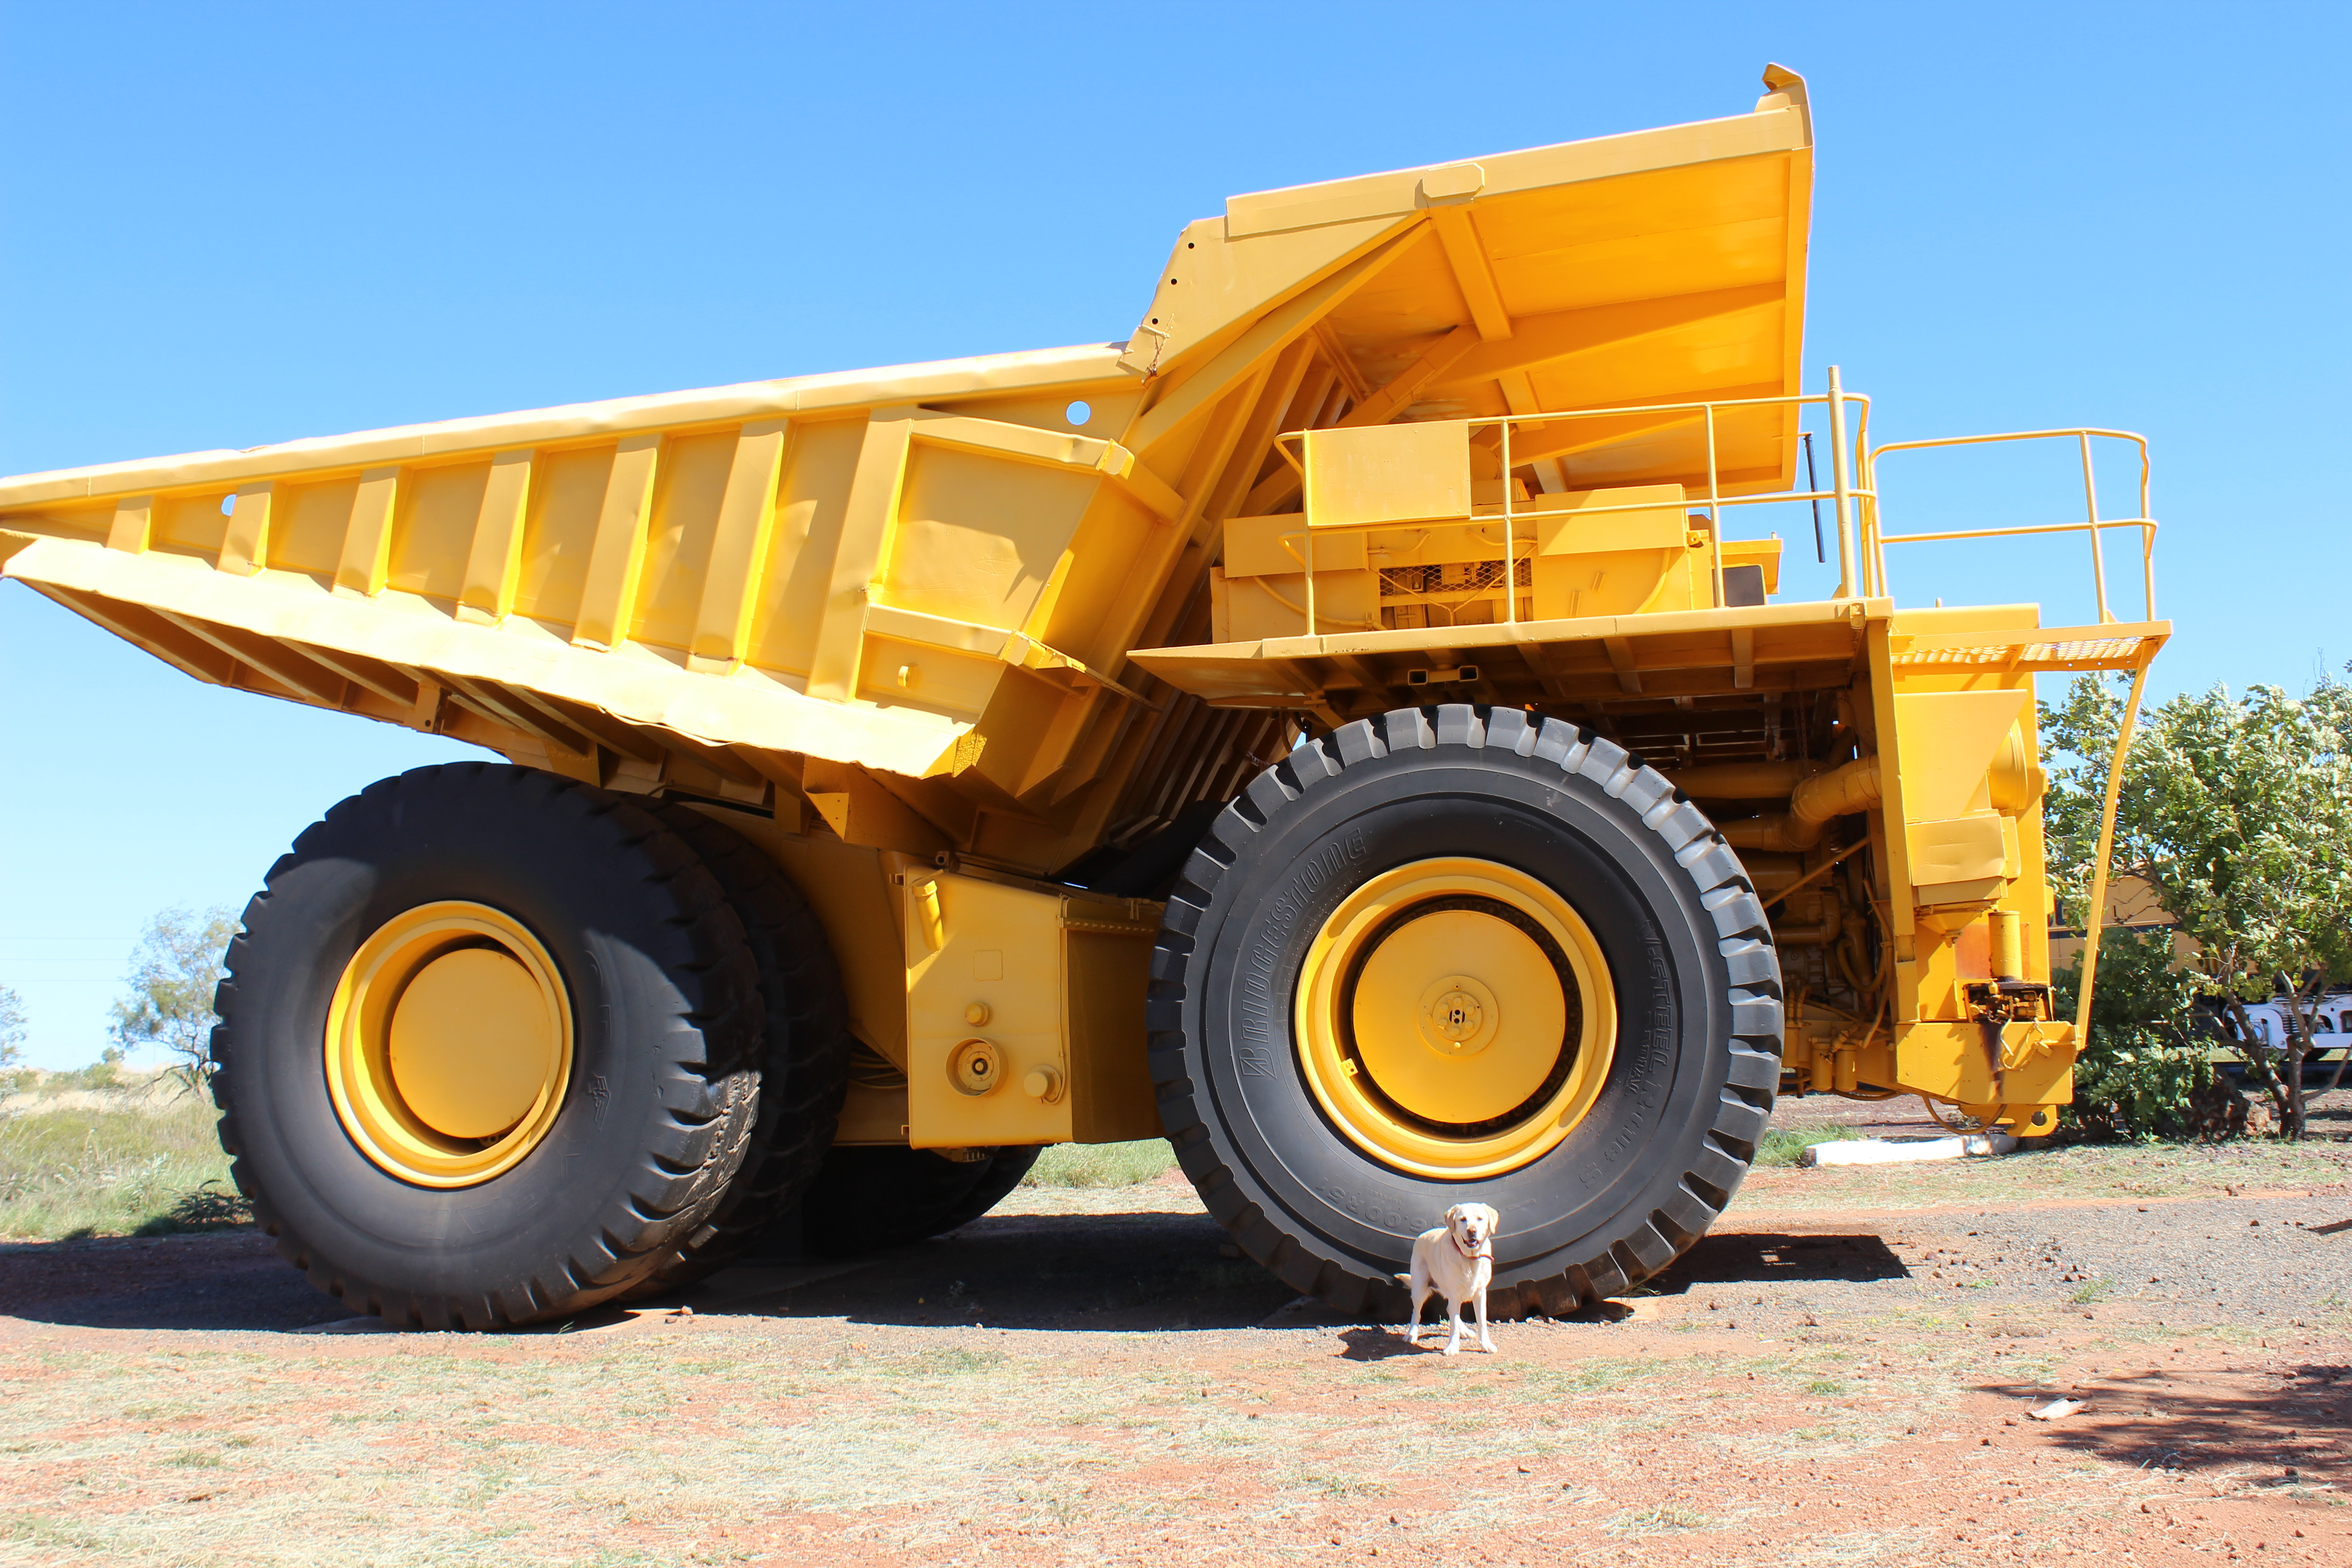 Gallery Photos of "Big Dumper Truck In A Pit" .